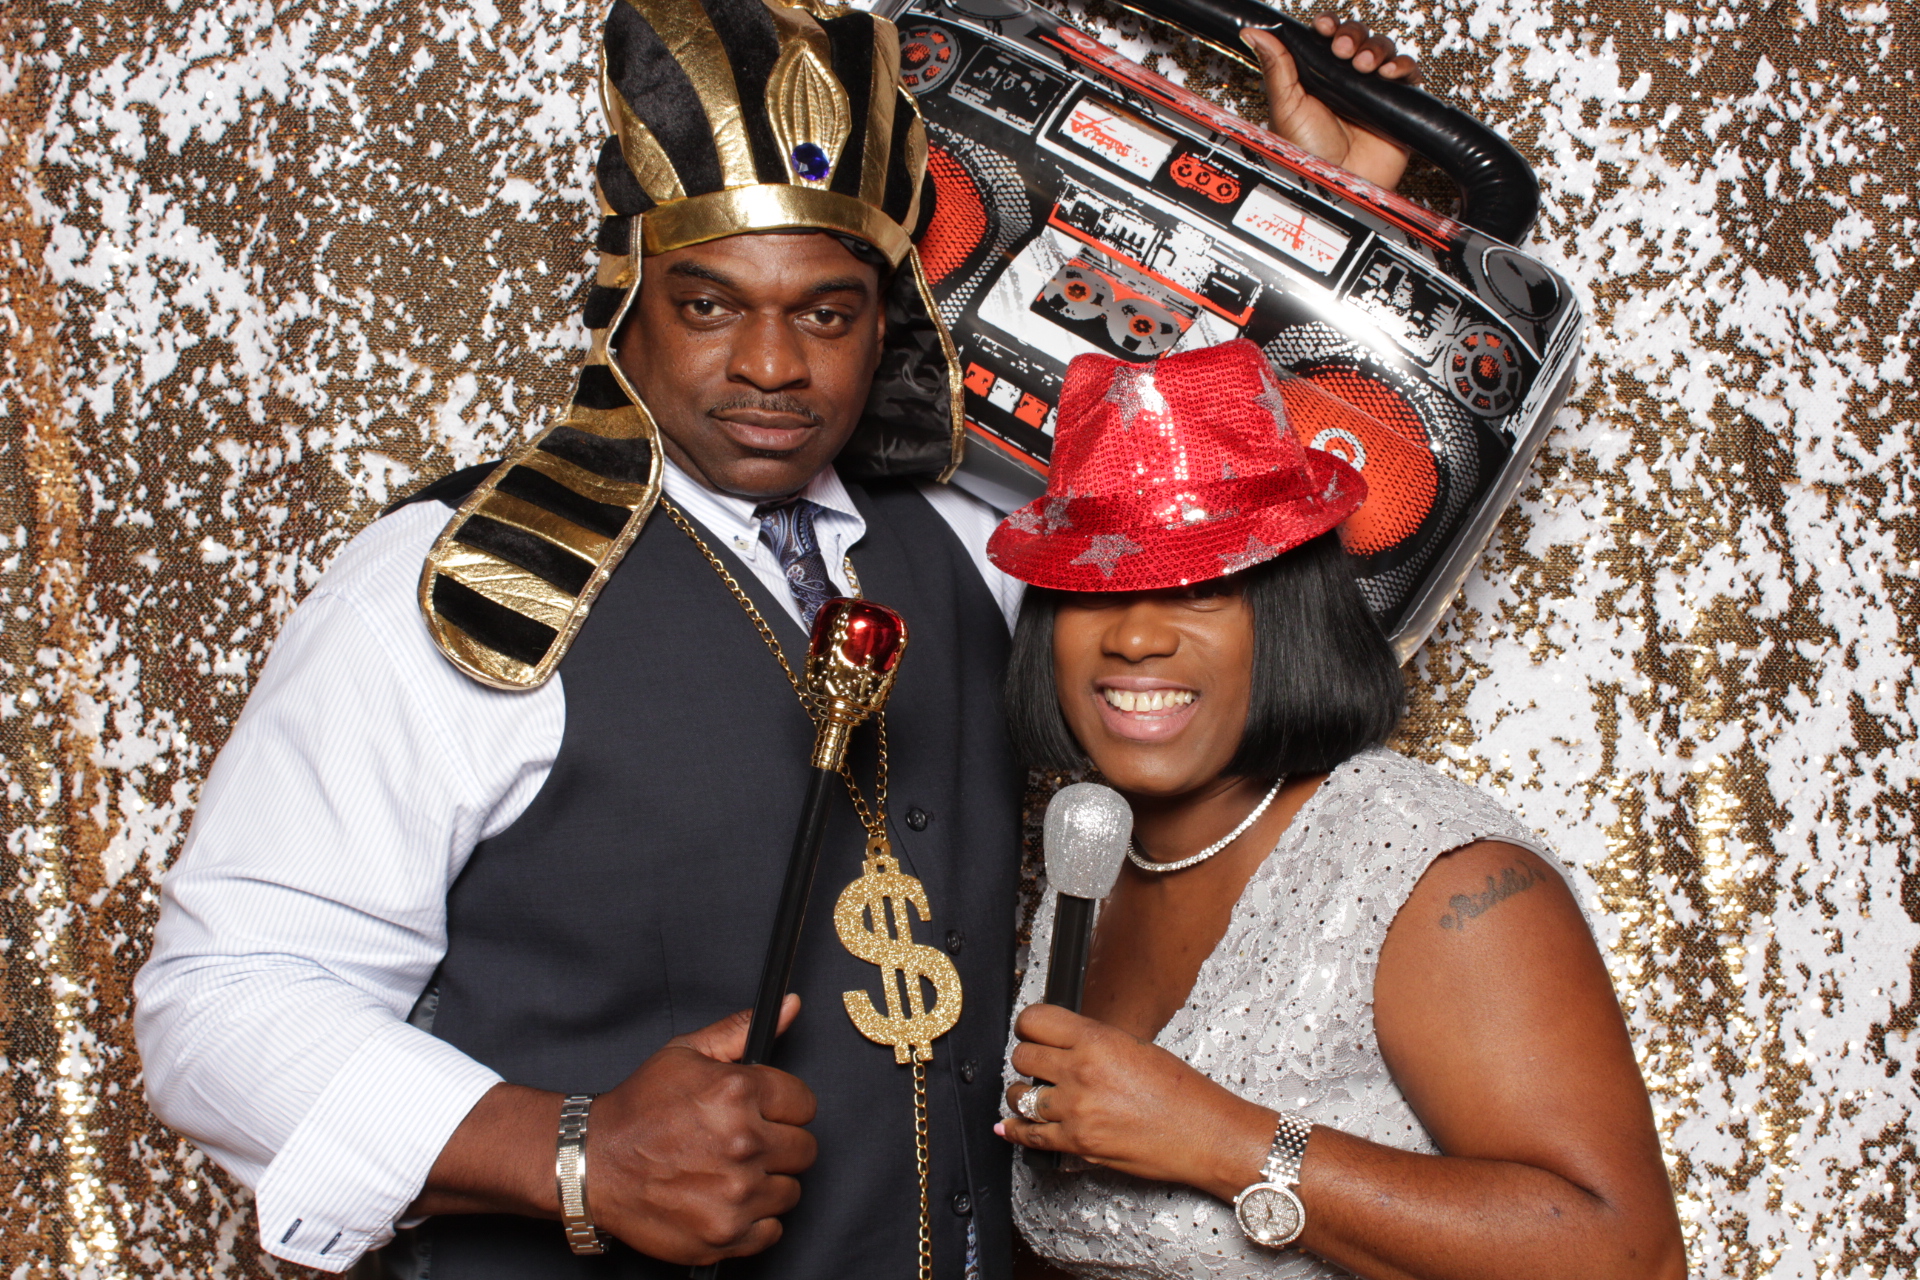 delaware photo booth rentals